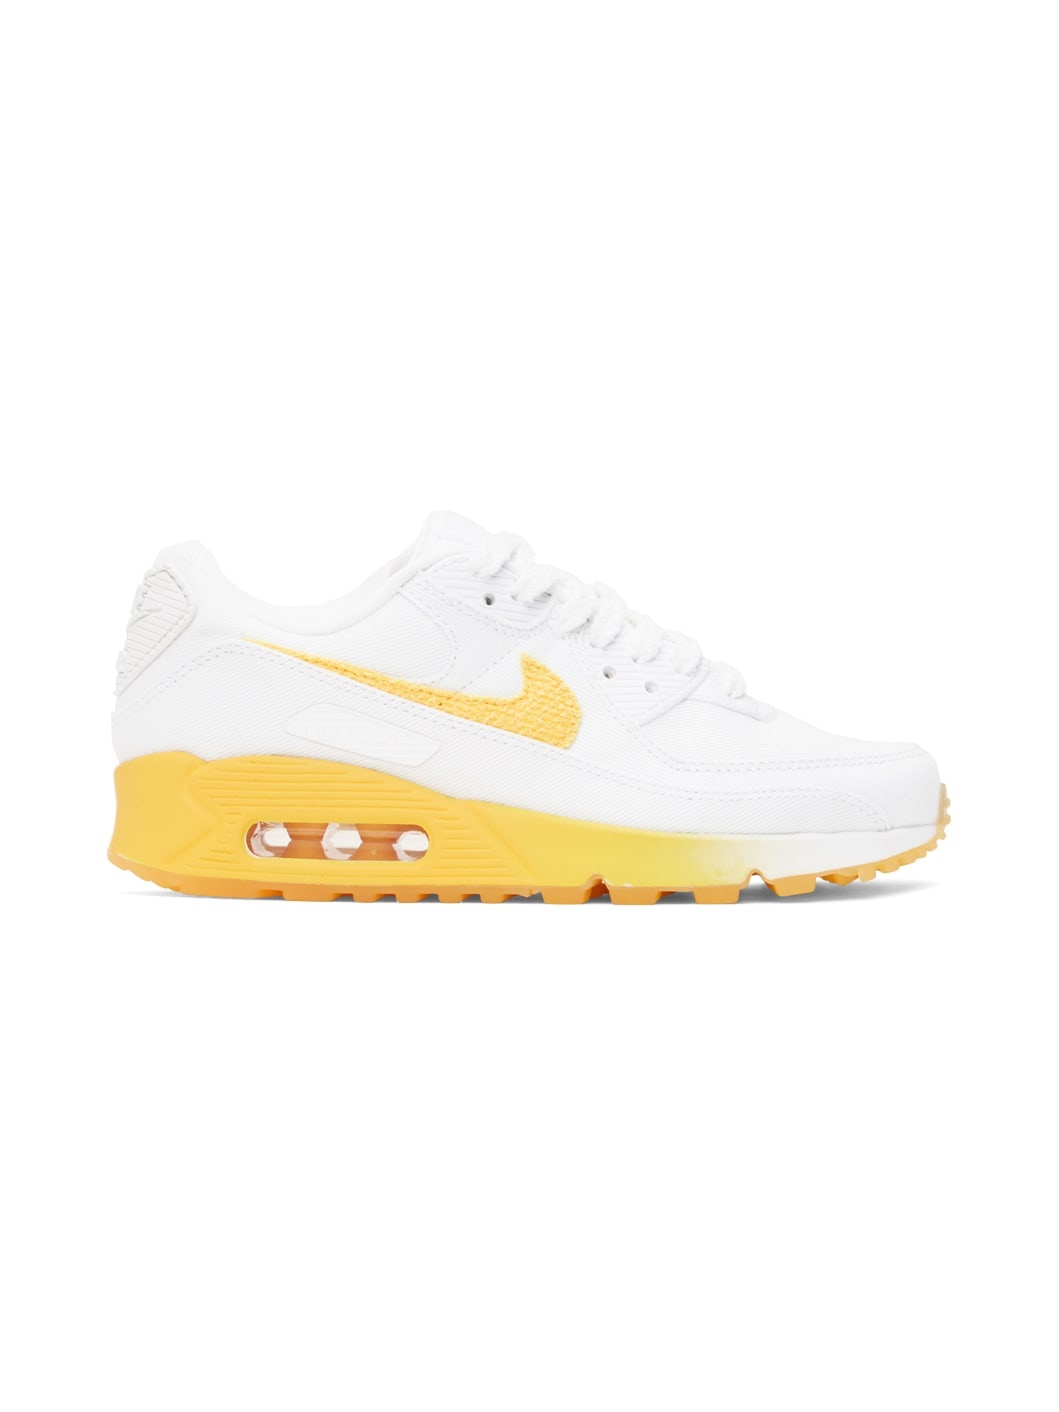 White & Yellow Air Max 90 SE Sneakers - 1